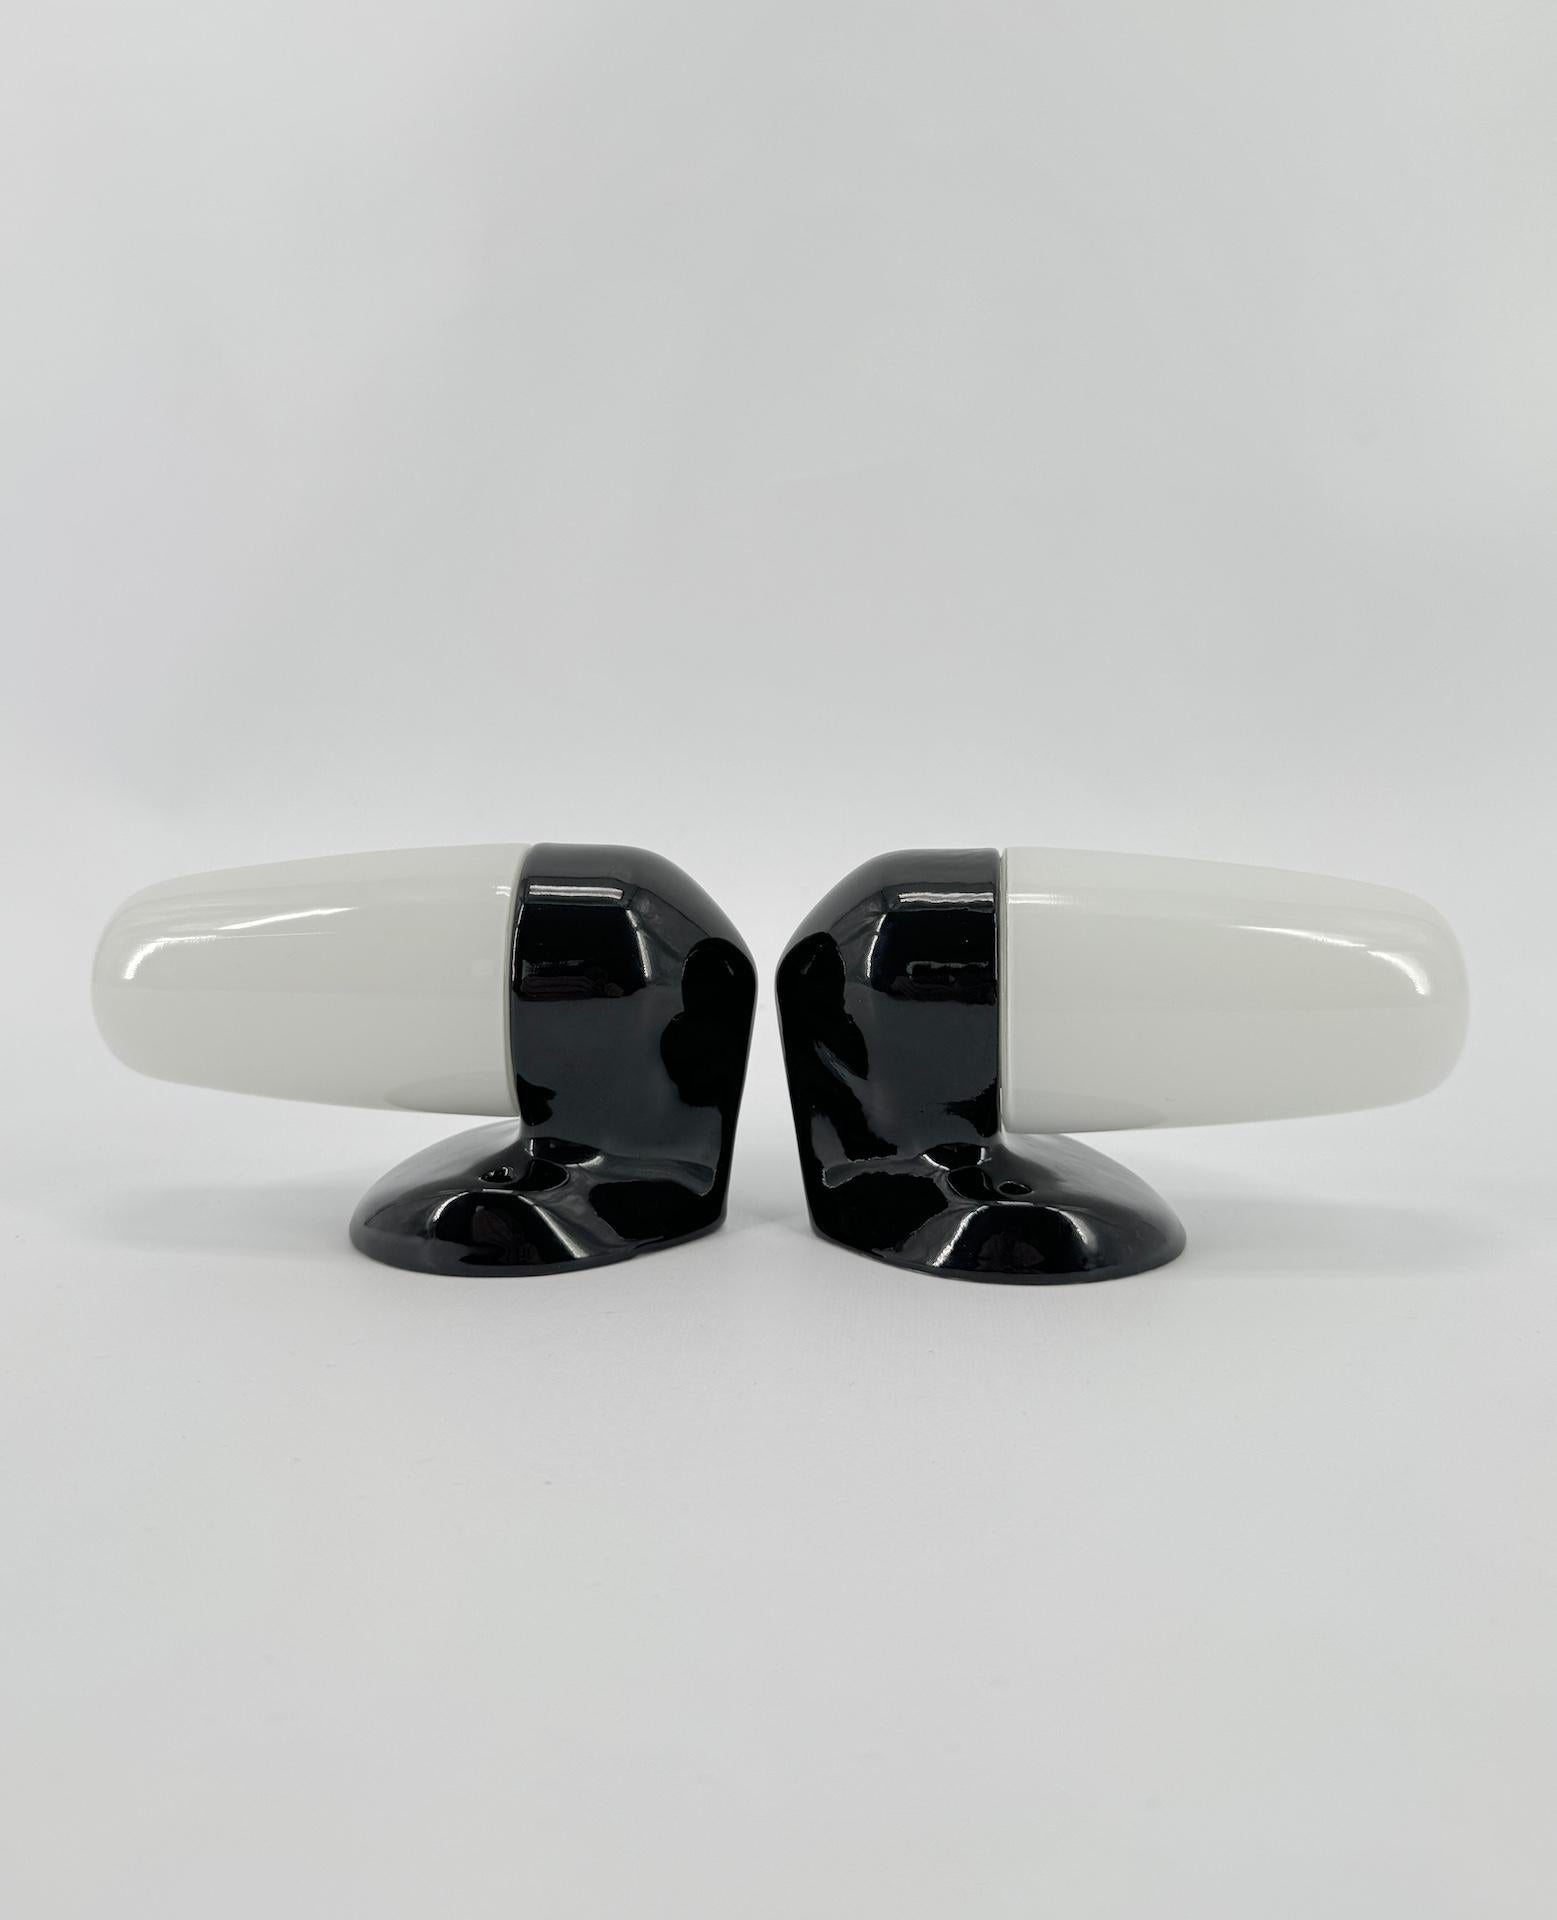 Mid-Century Modern Pair of Ceramic Black Wall Lamp By Wilhelm Wagenfeld For Lindner 1950's